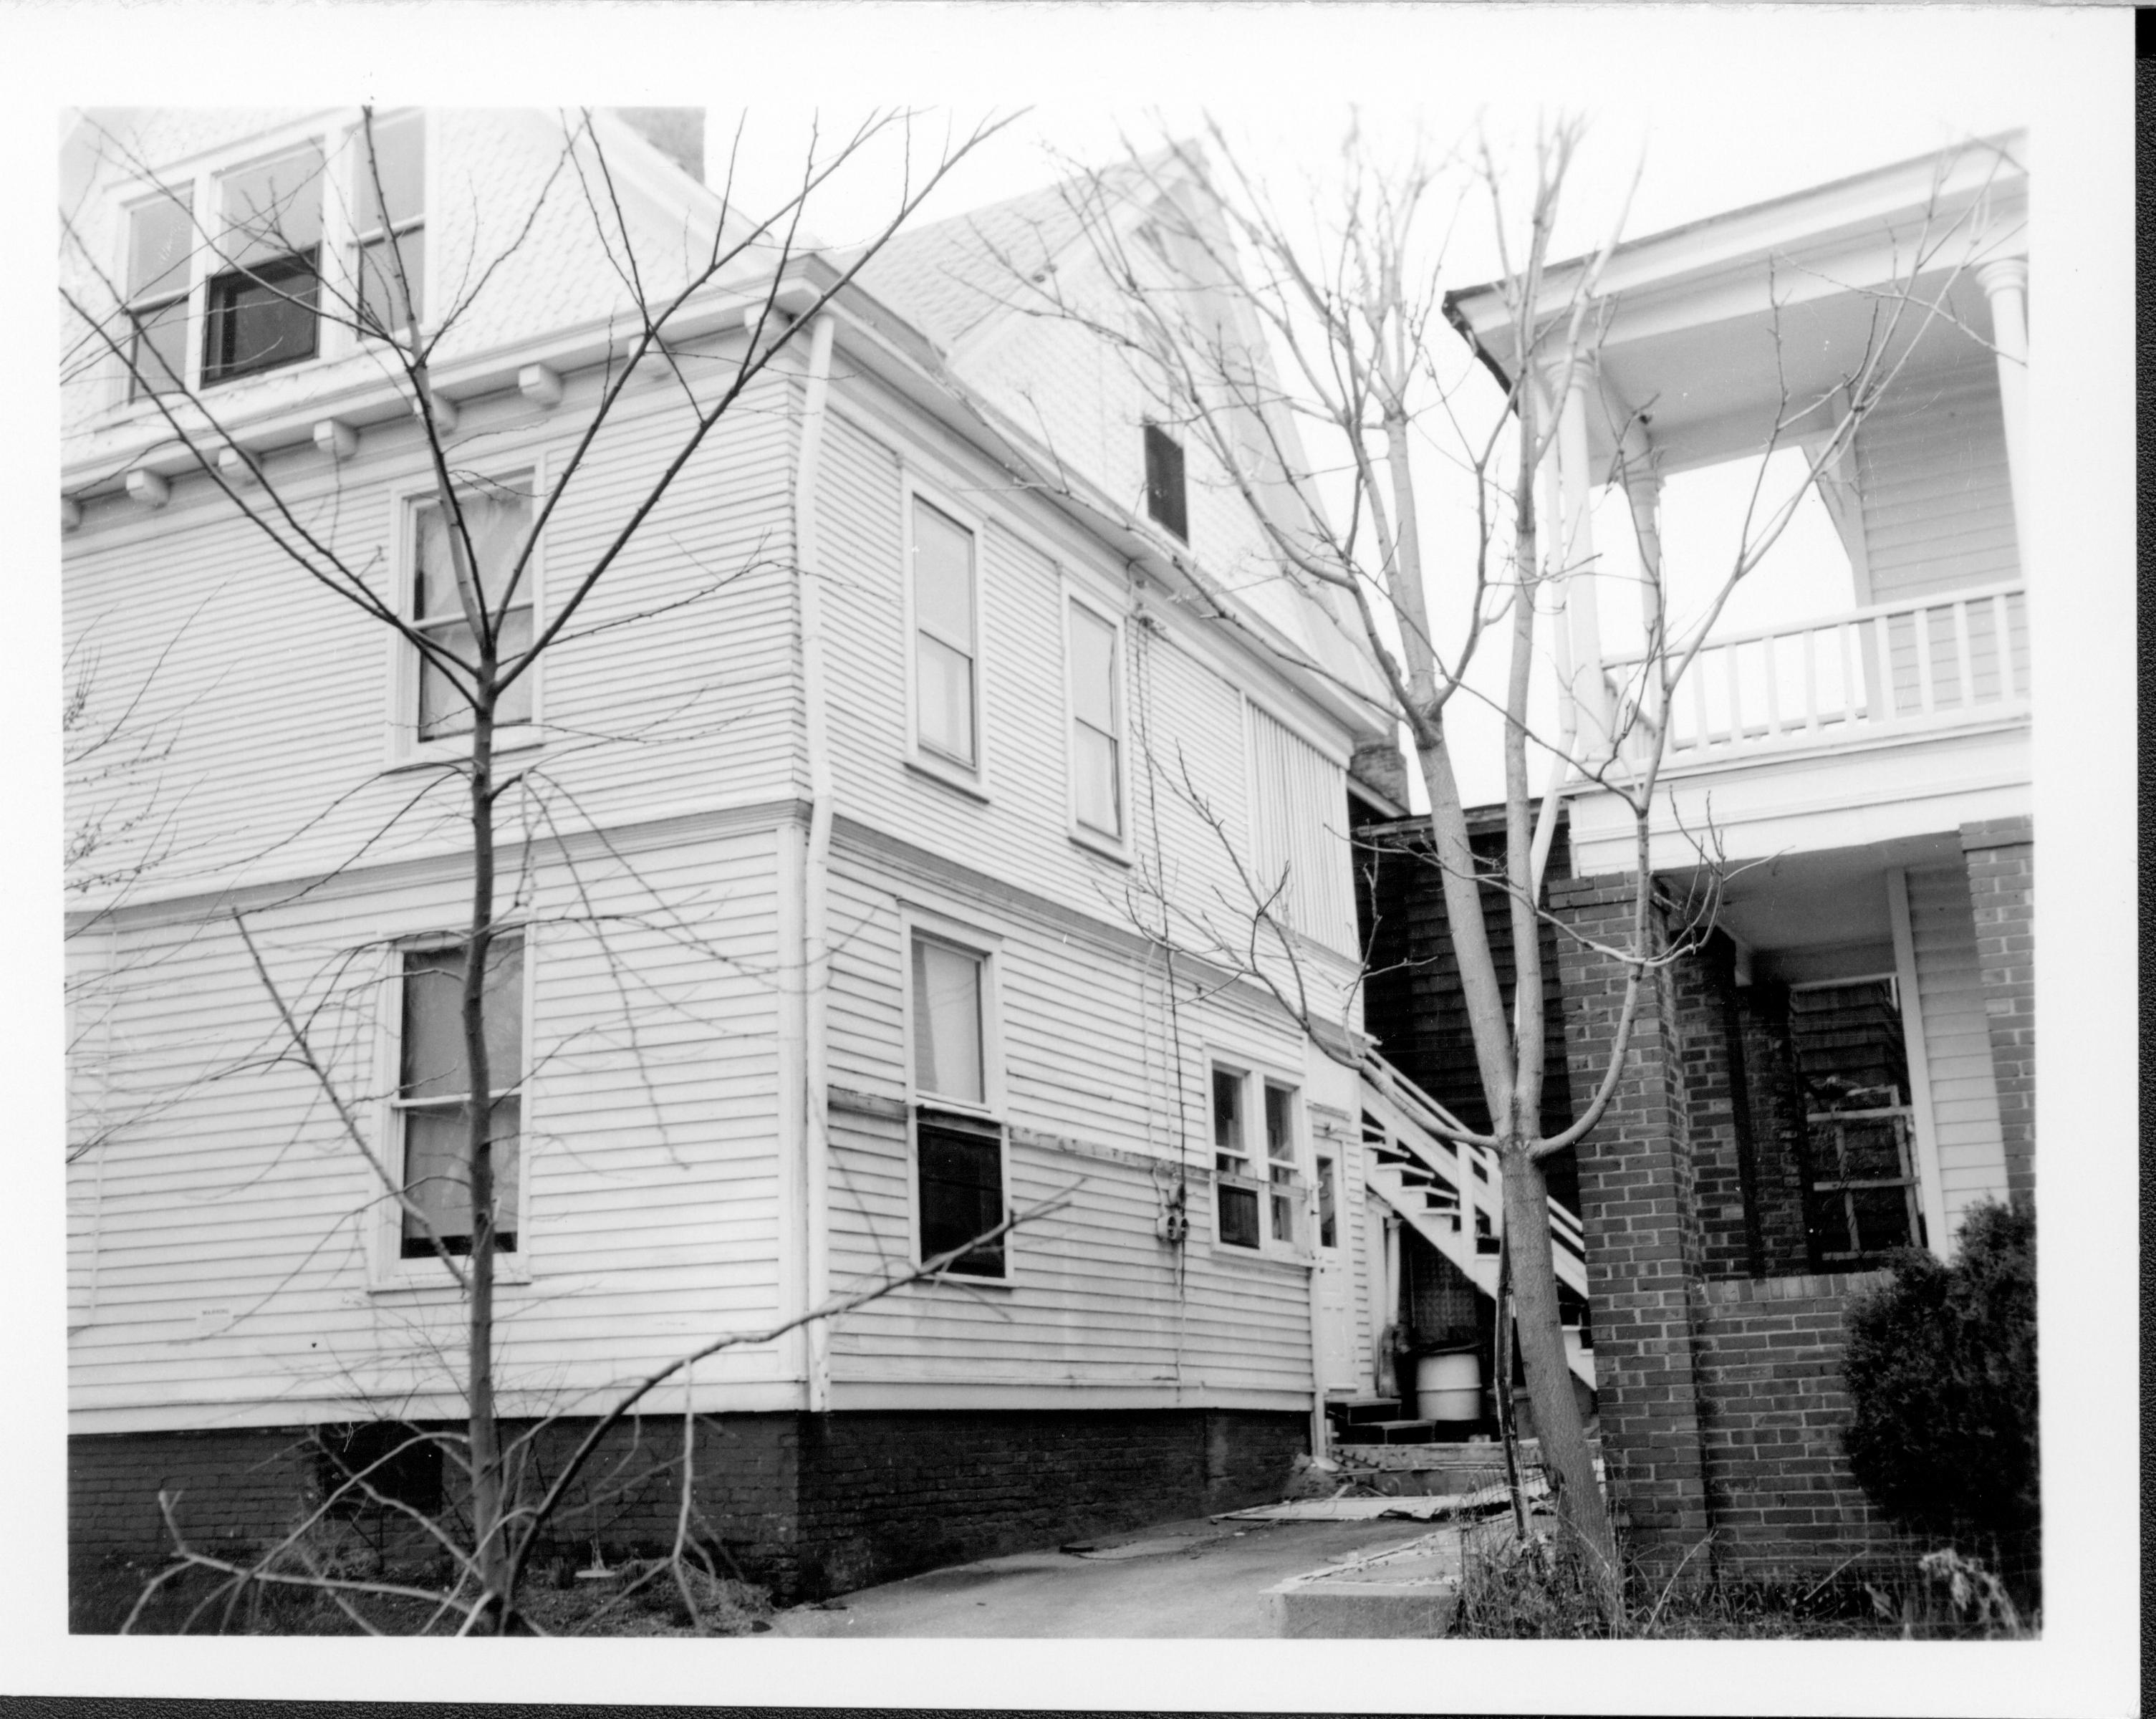 Home on left owned by William Hermes in use as apartments, Southeast corner, Block 7, Lot 8 along Jackson Street.  Home on right owned by Hugh Garvey in use as apartments. Now area is Visitor Center. Looking North from Jackson Street with narrow parking area inbetween buildings. Hermes, Garvey, Visitor Center, Jackson Street